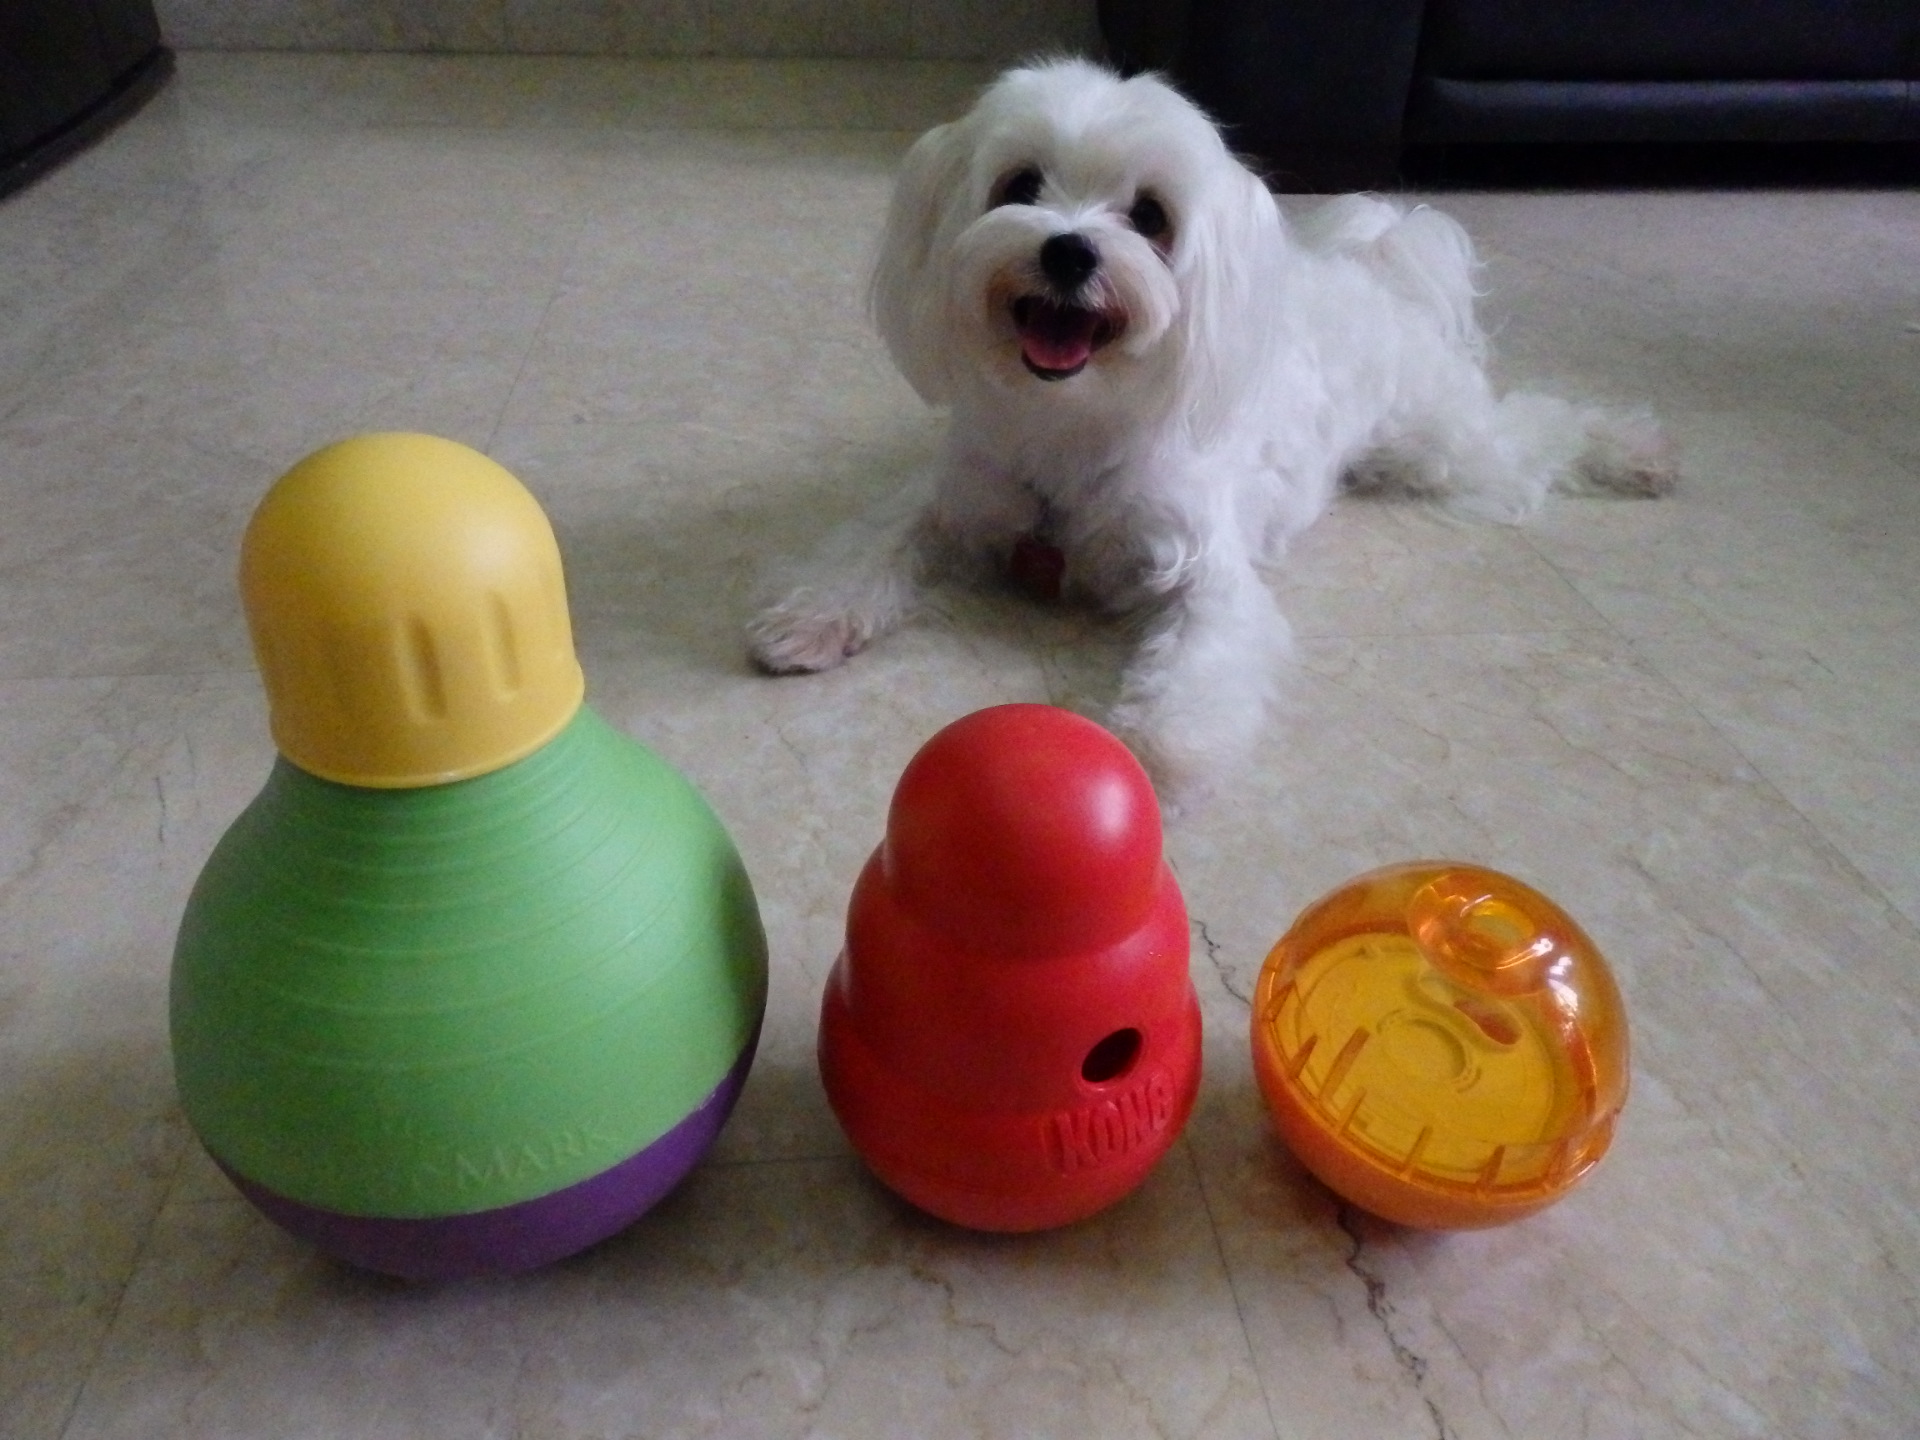 Testing TOP Rated Dog Puzzle Toy  3 Dogs Review Bob-A-Lot Interactive Toy  